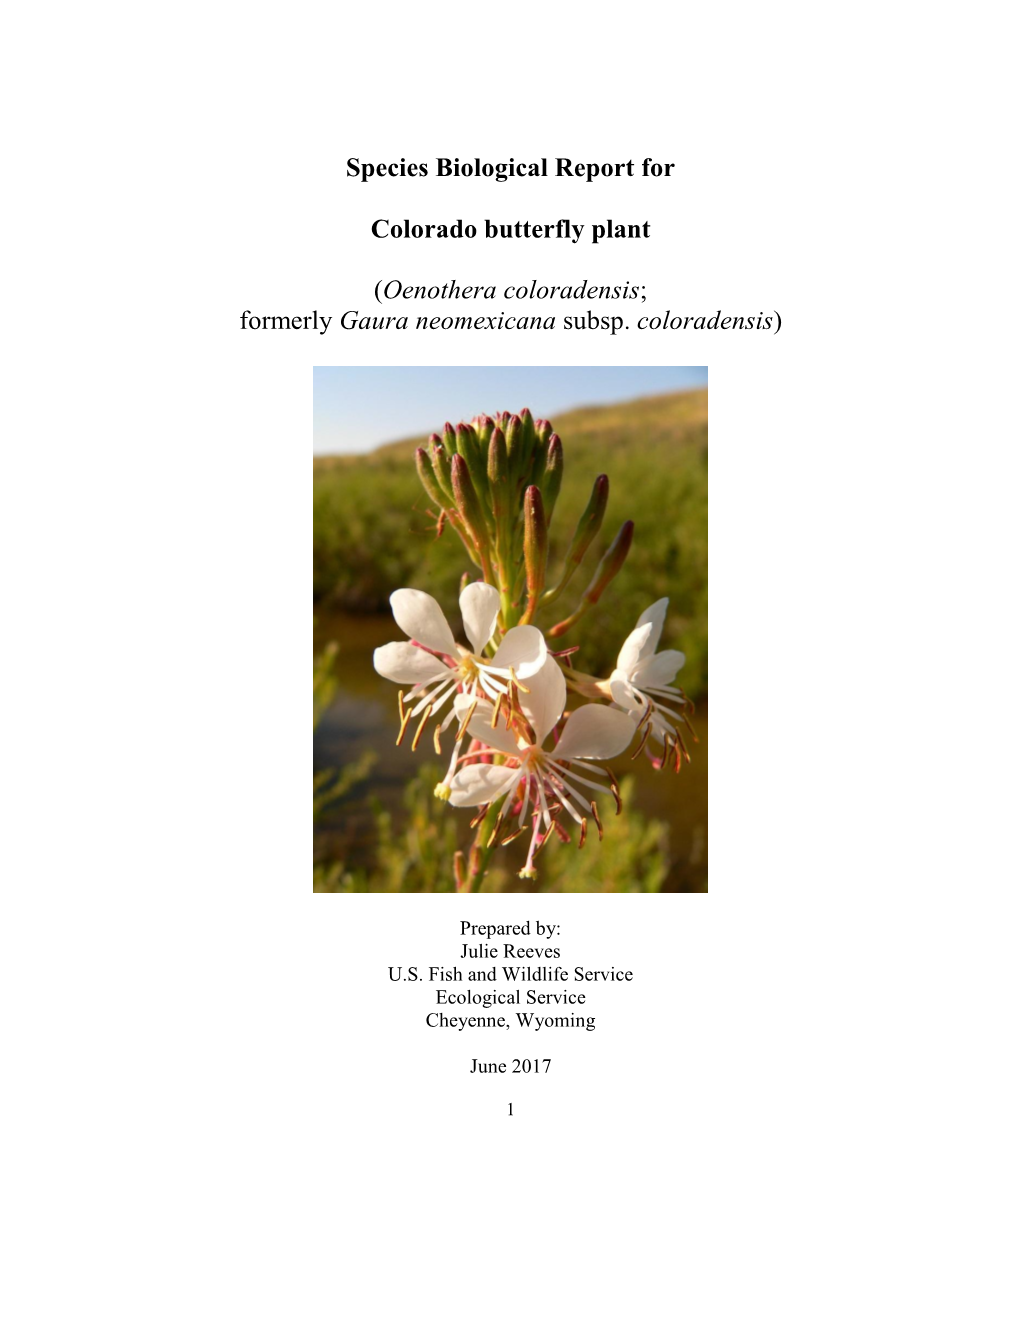 Species Biological Report for Colorado Butterfly Plant (Oenothera Coloradensis; Formerly Gaura Neomexicana Subsp. Coloradensis